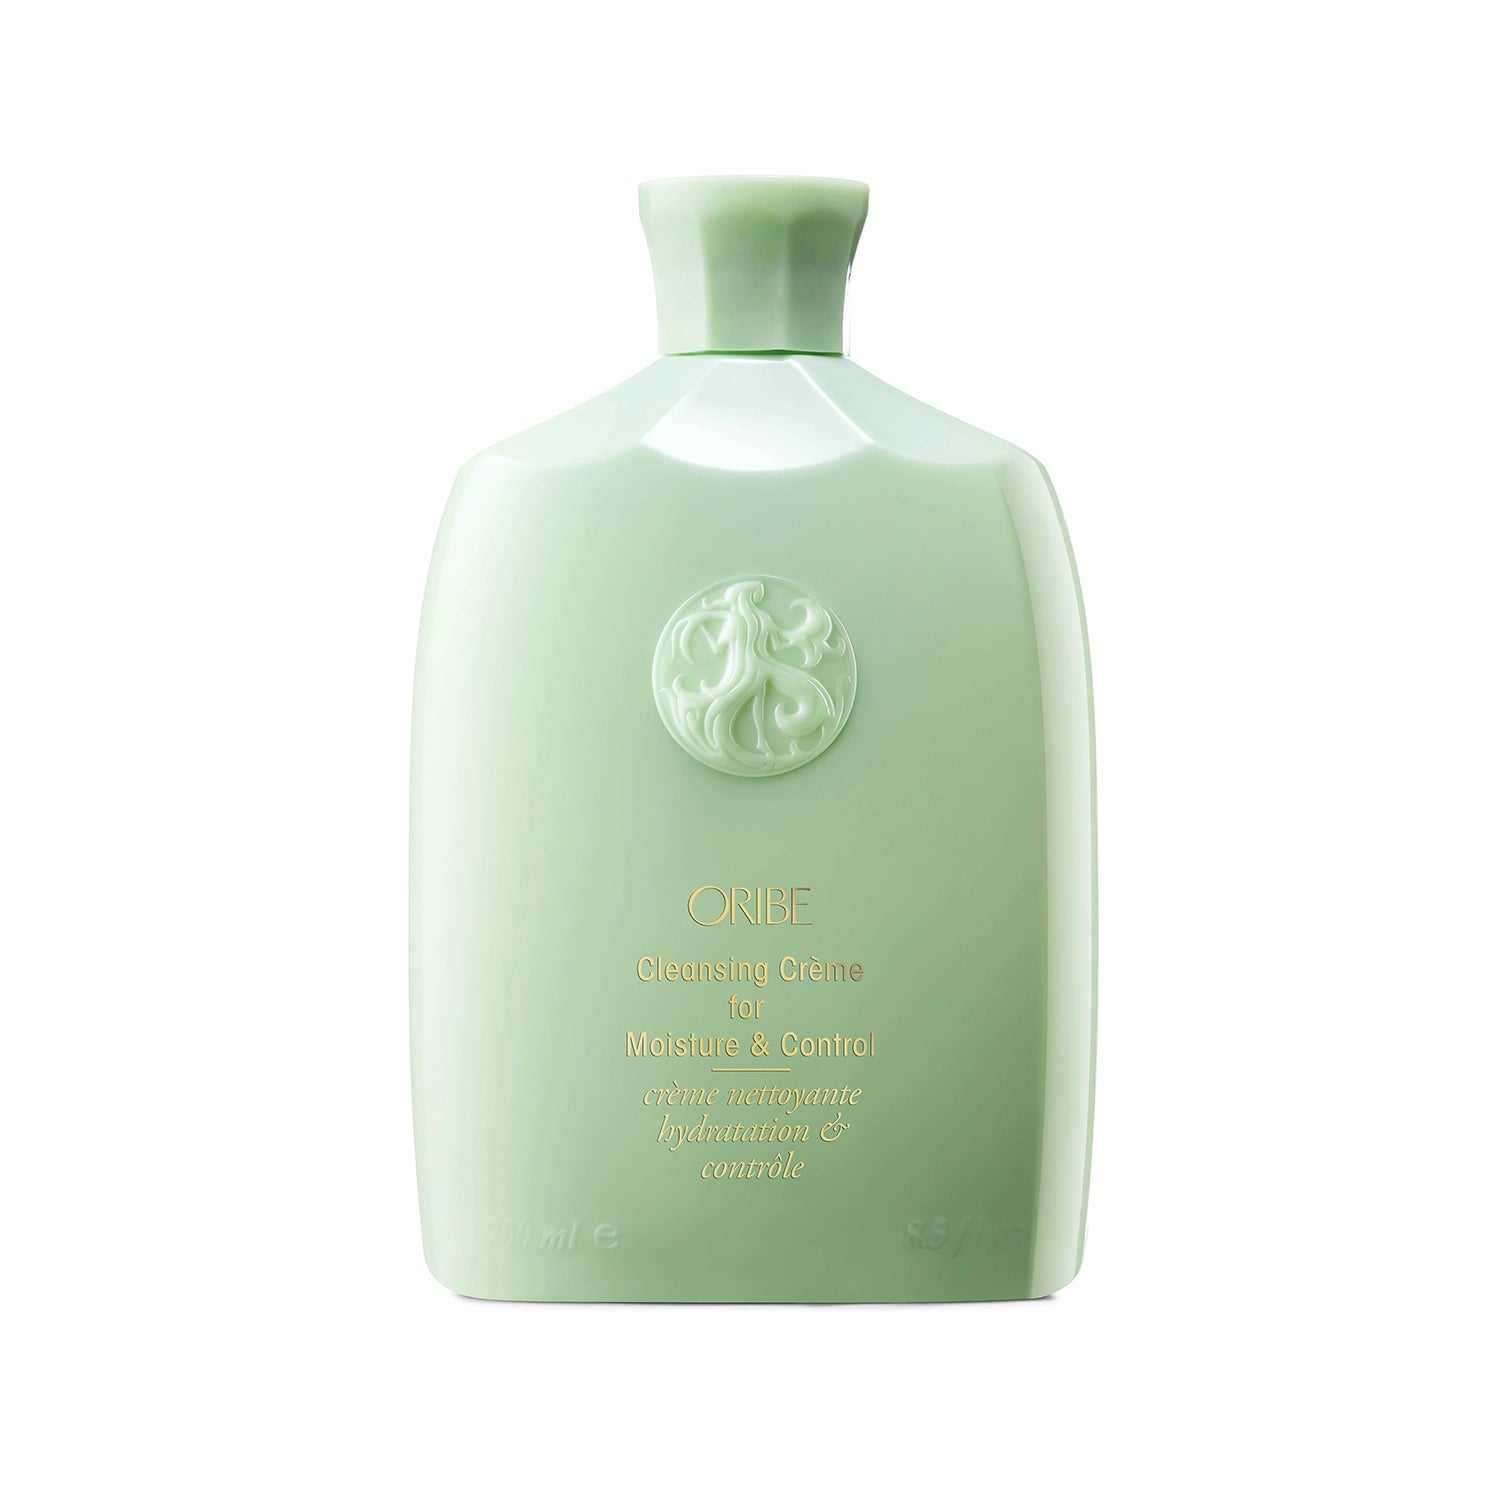 ORIBE - Hydration and control cleansing cream (250ml)